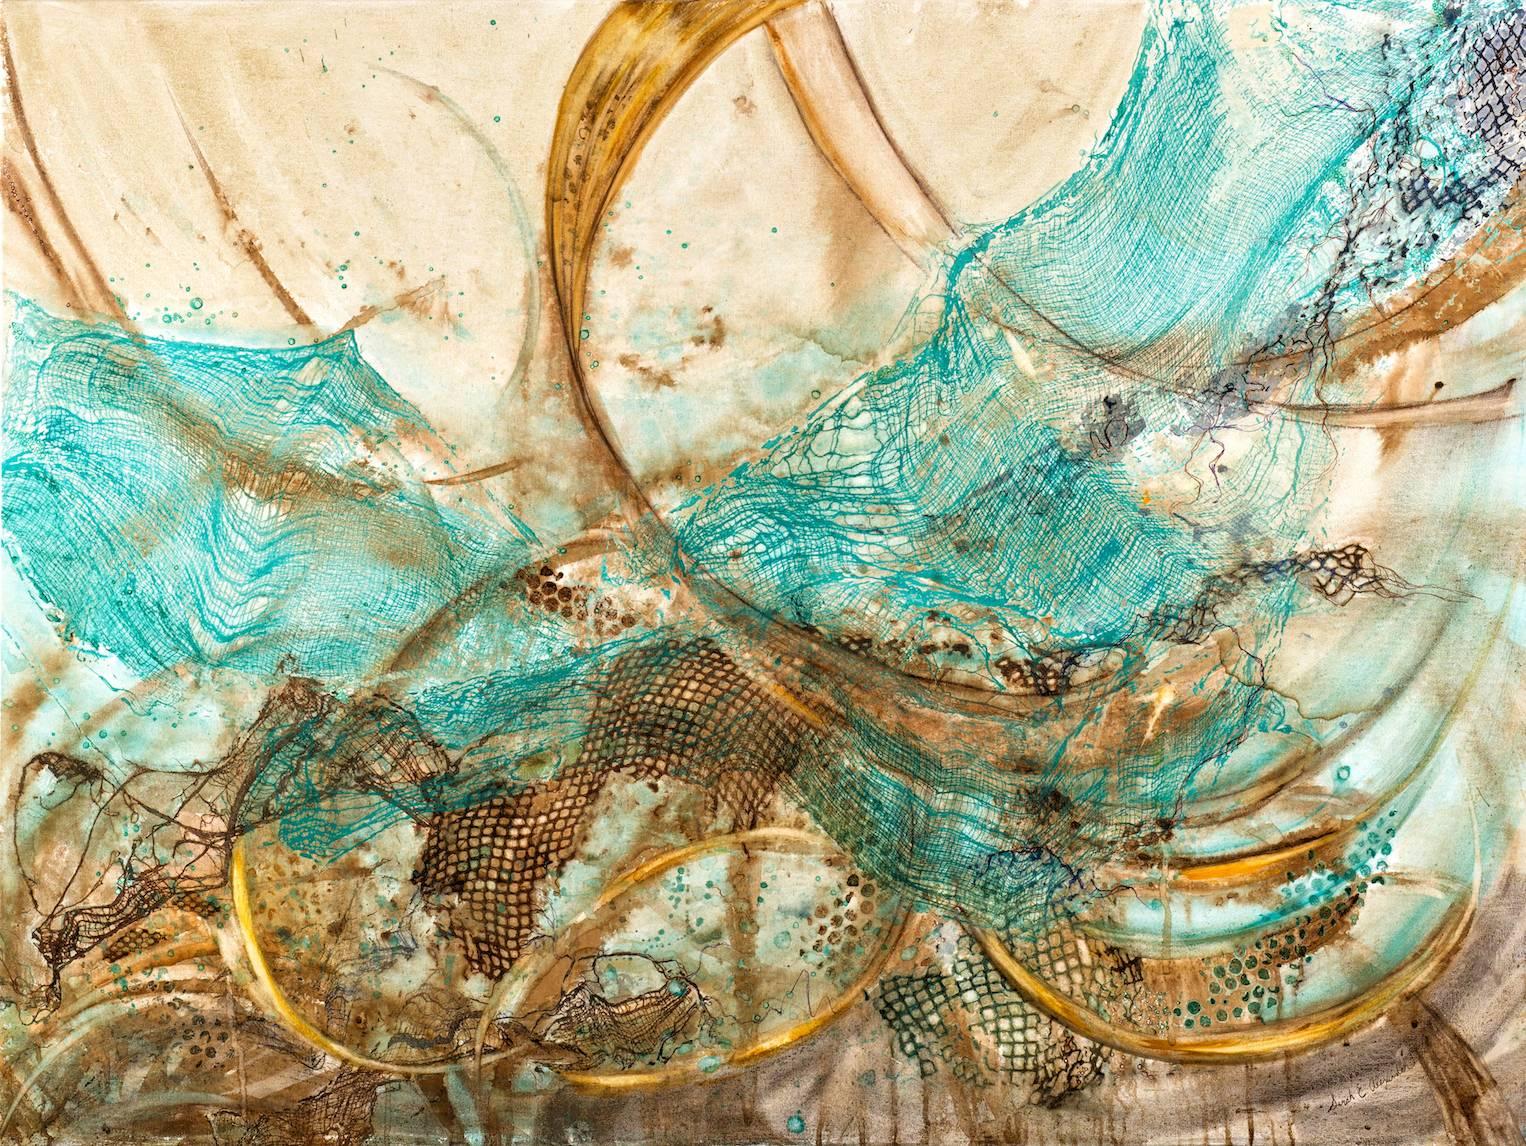 "Envelop", abstract, turquoise, browns, mixed media, watercolor, painting - Mixed Media Art by Sarah Alexander